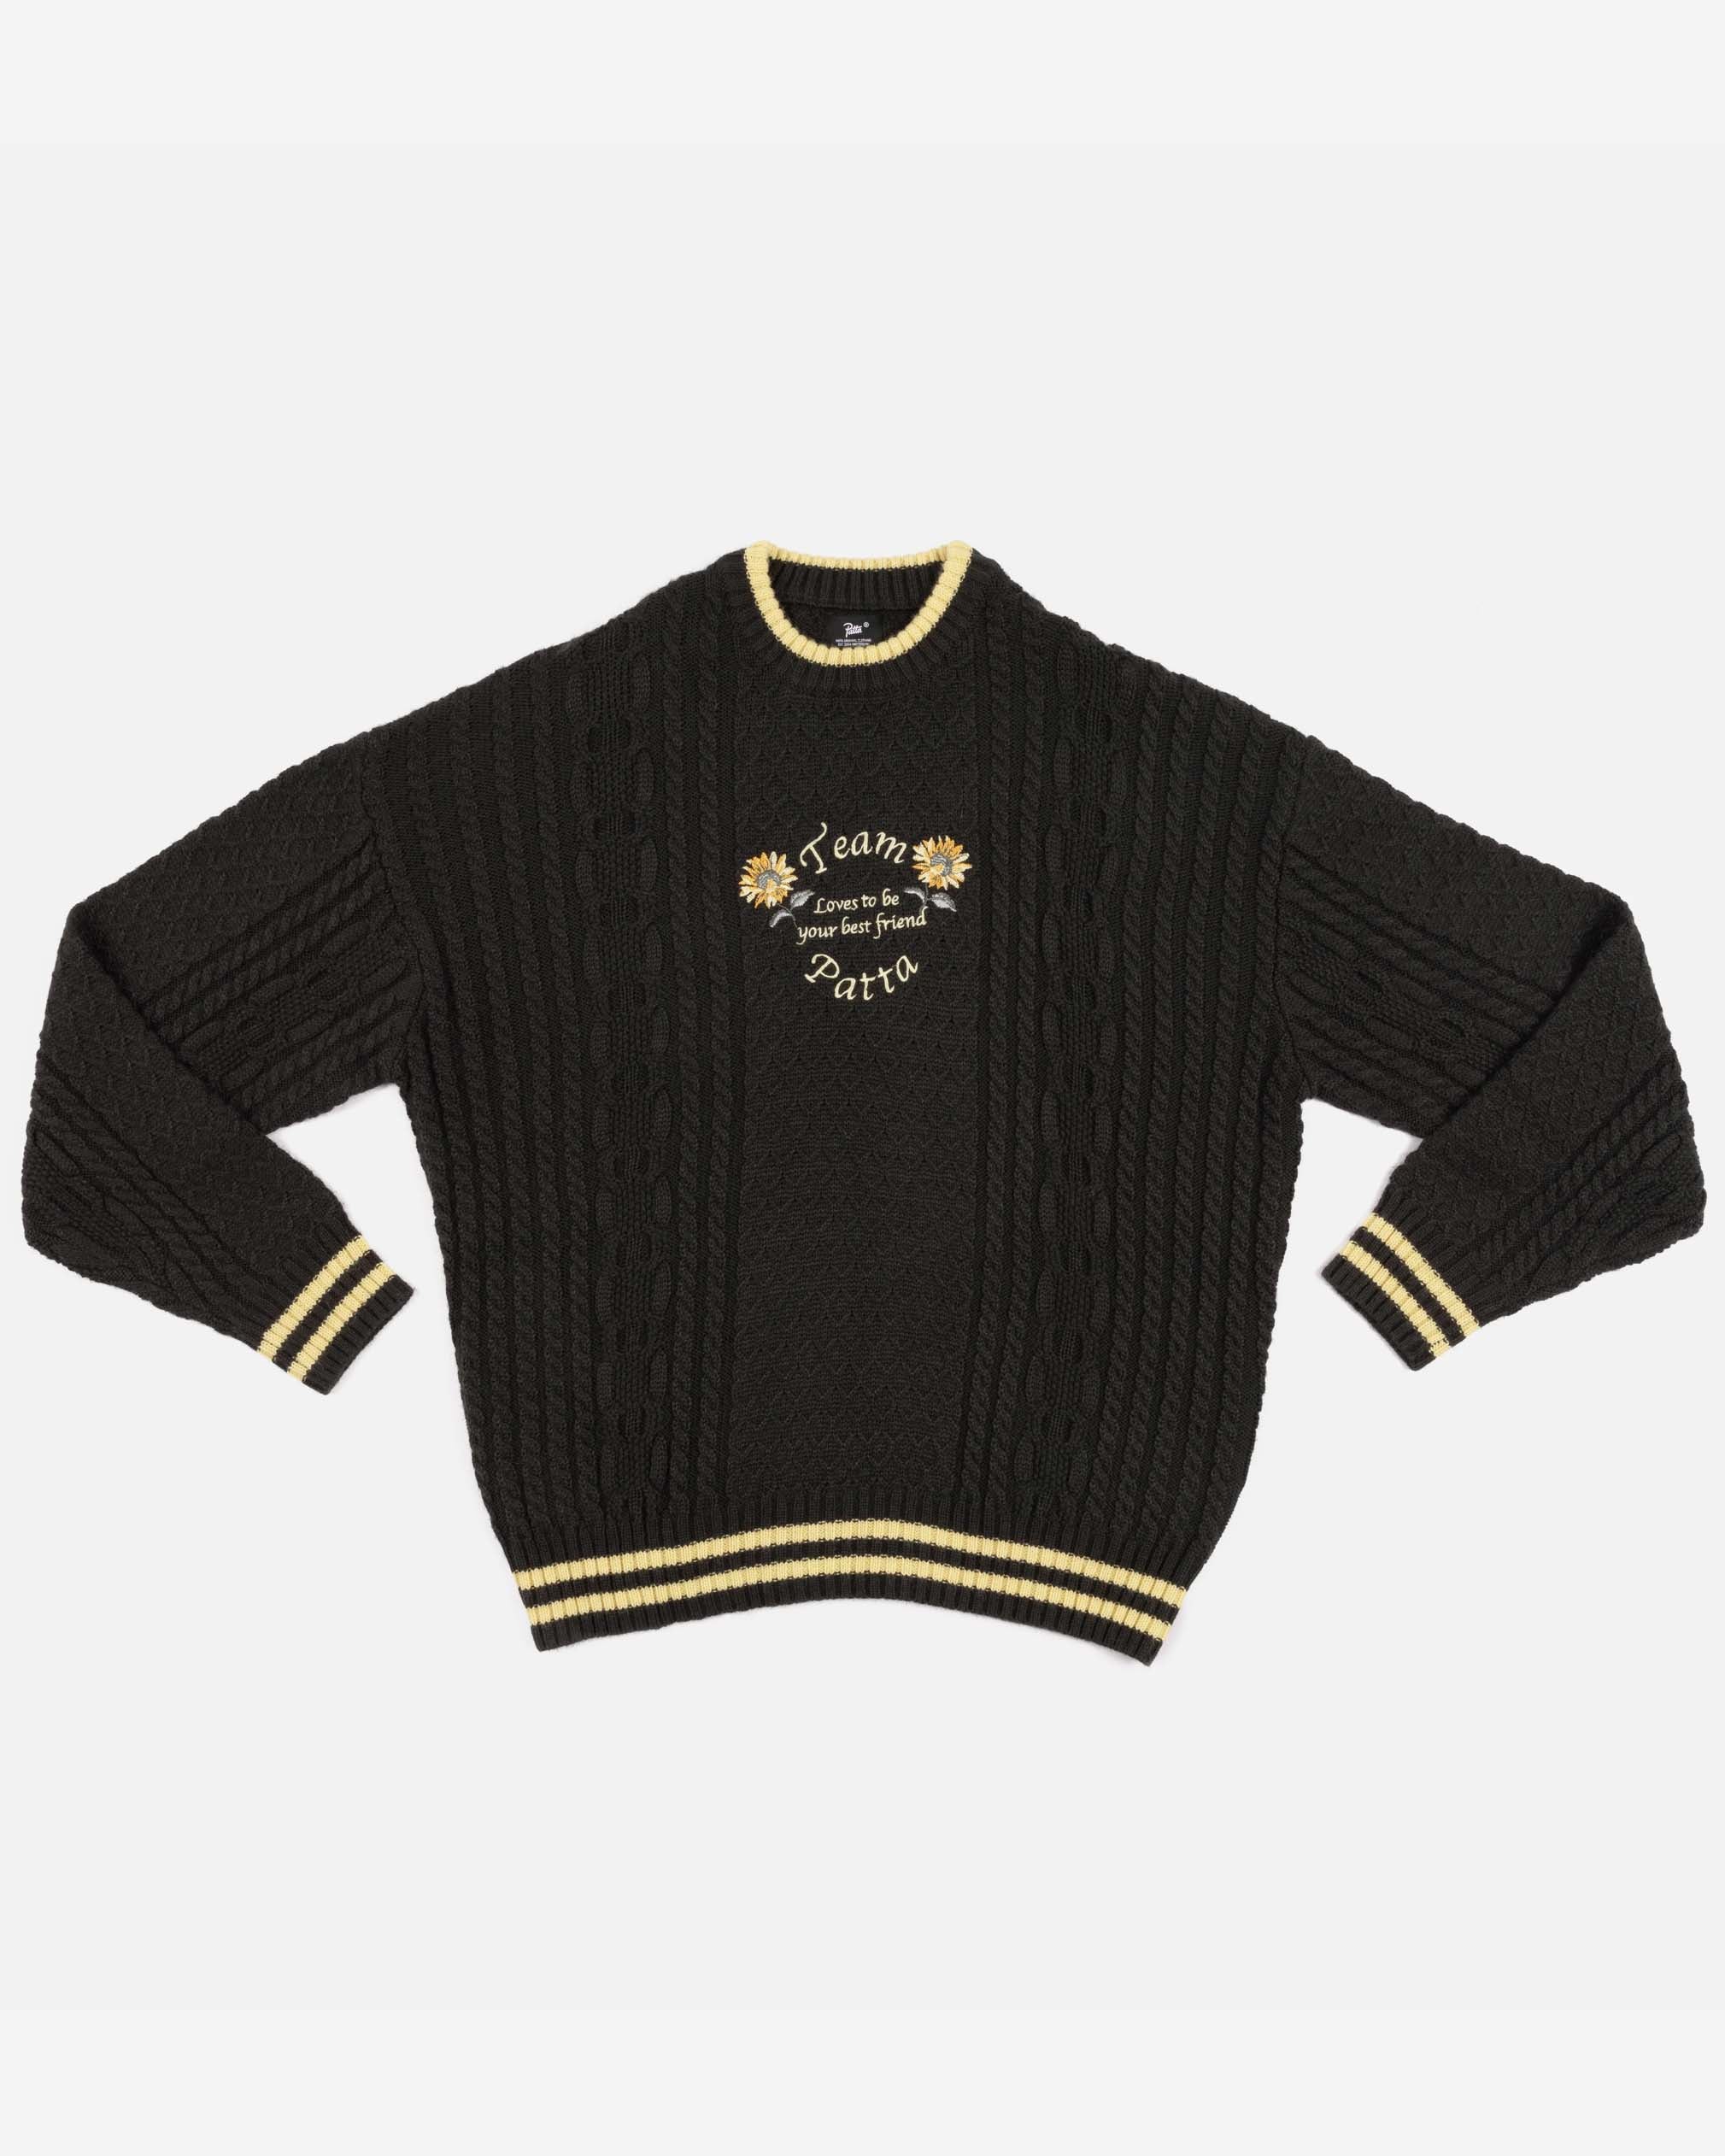 Patta Loves You Cable Knitted Sweater image